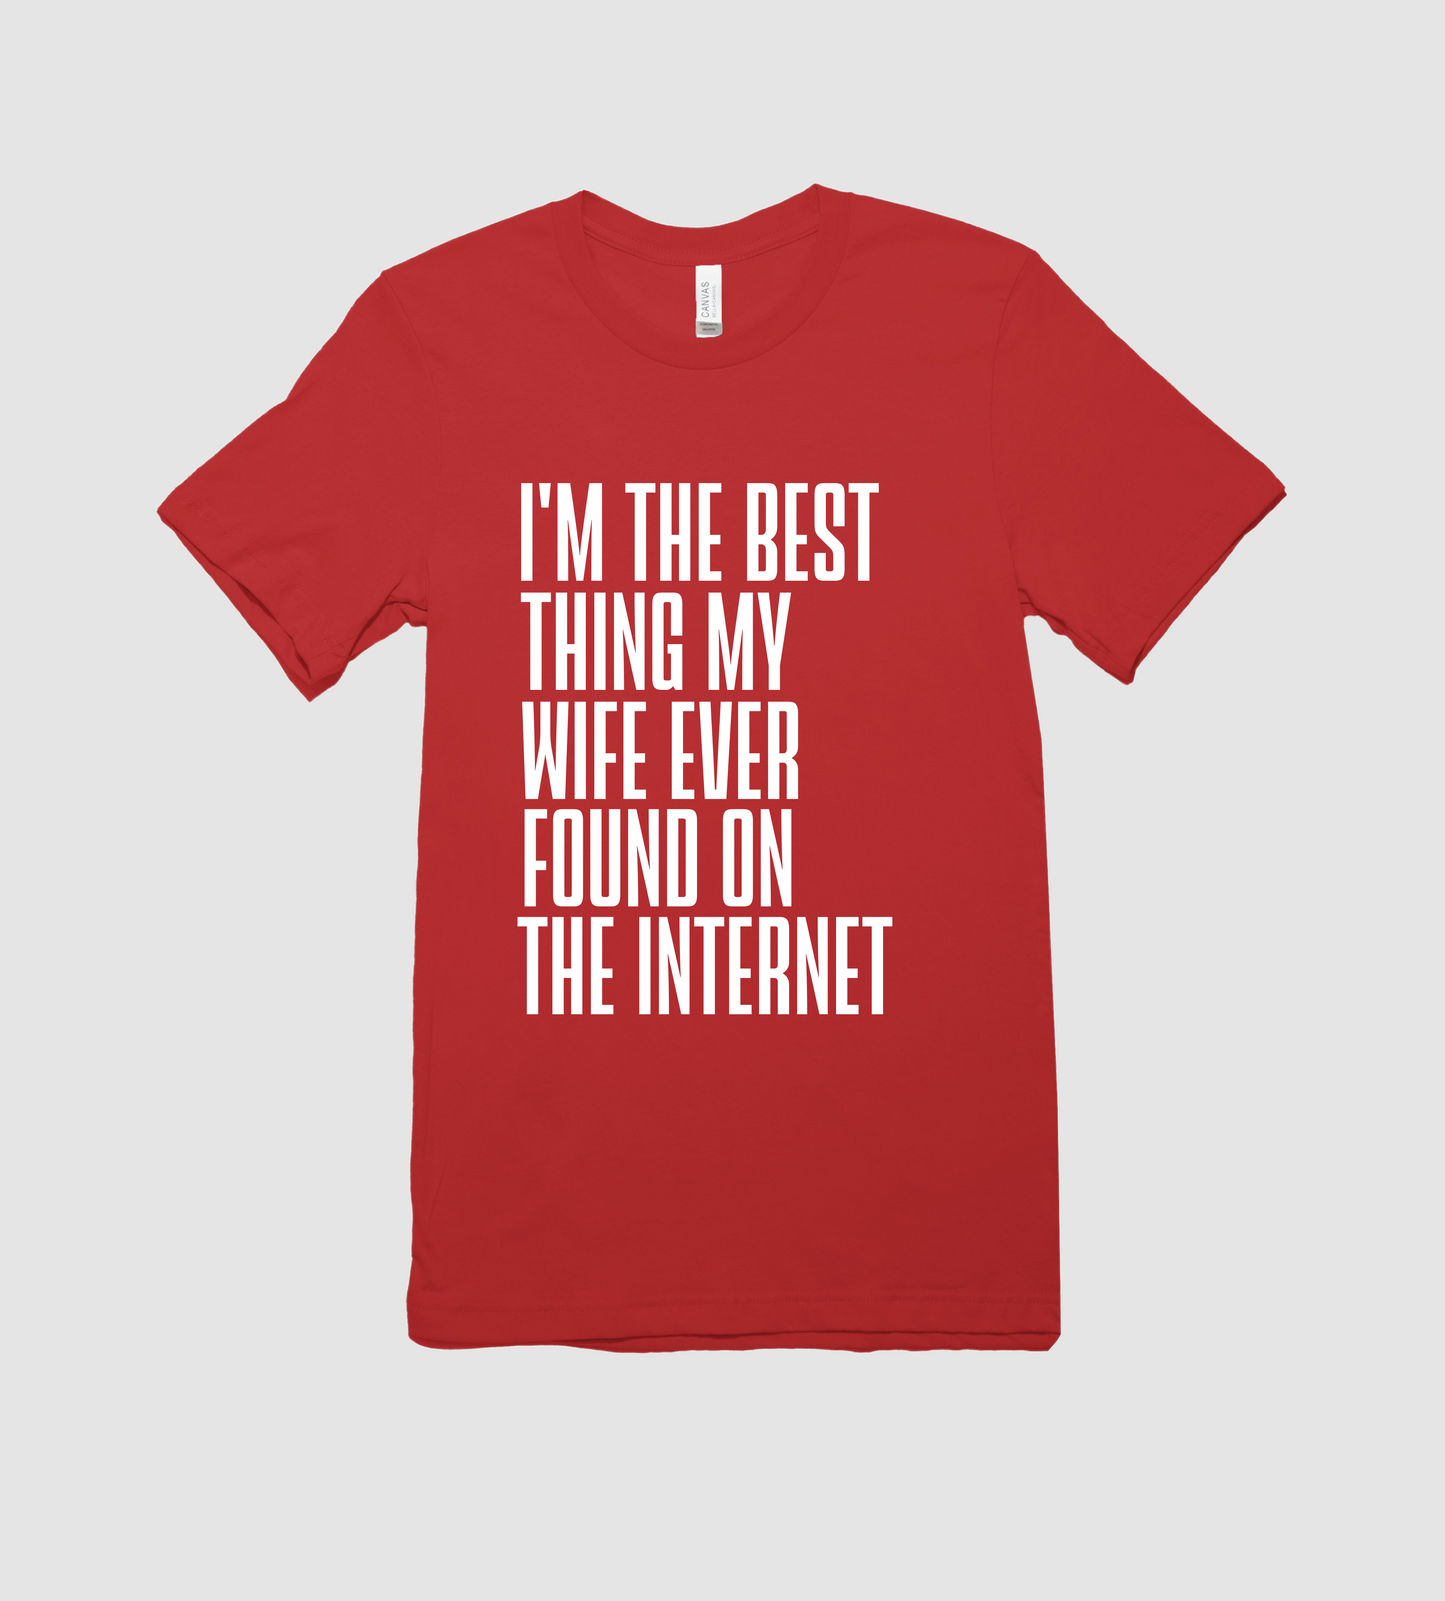 I'm the Best Thing My Wife Ever Found on the Internet Tee/ Funny Mens Shirt